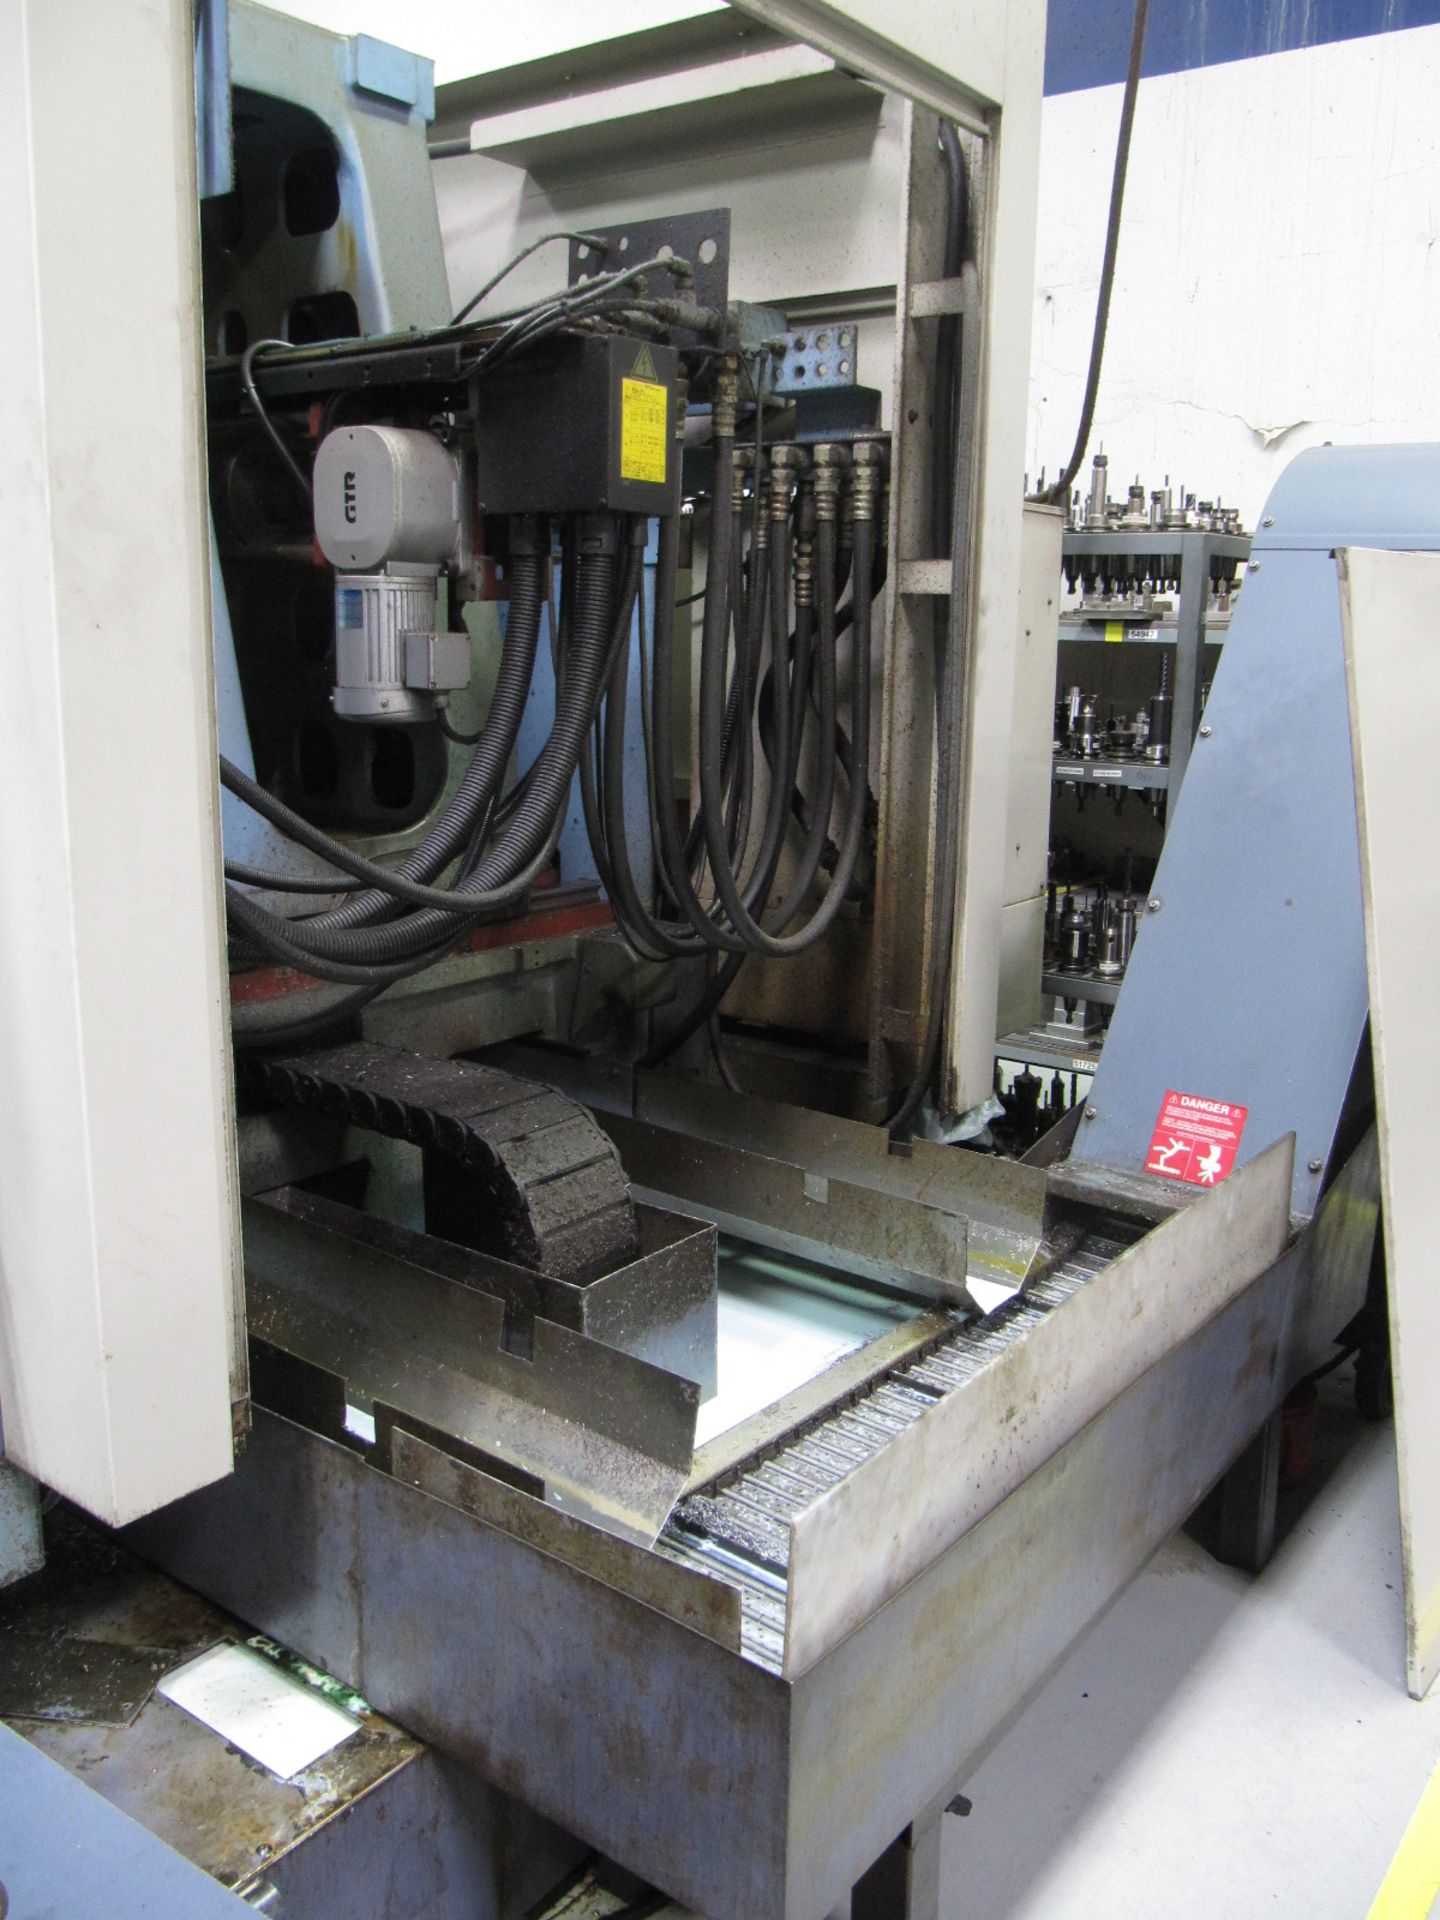 OKK HM-50S 4-Axis 2-Pallet CNC Horizontral Machining Center s/n 395 w/ Fanuc Series 16i-M Controls - Image 8 of 15